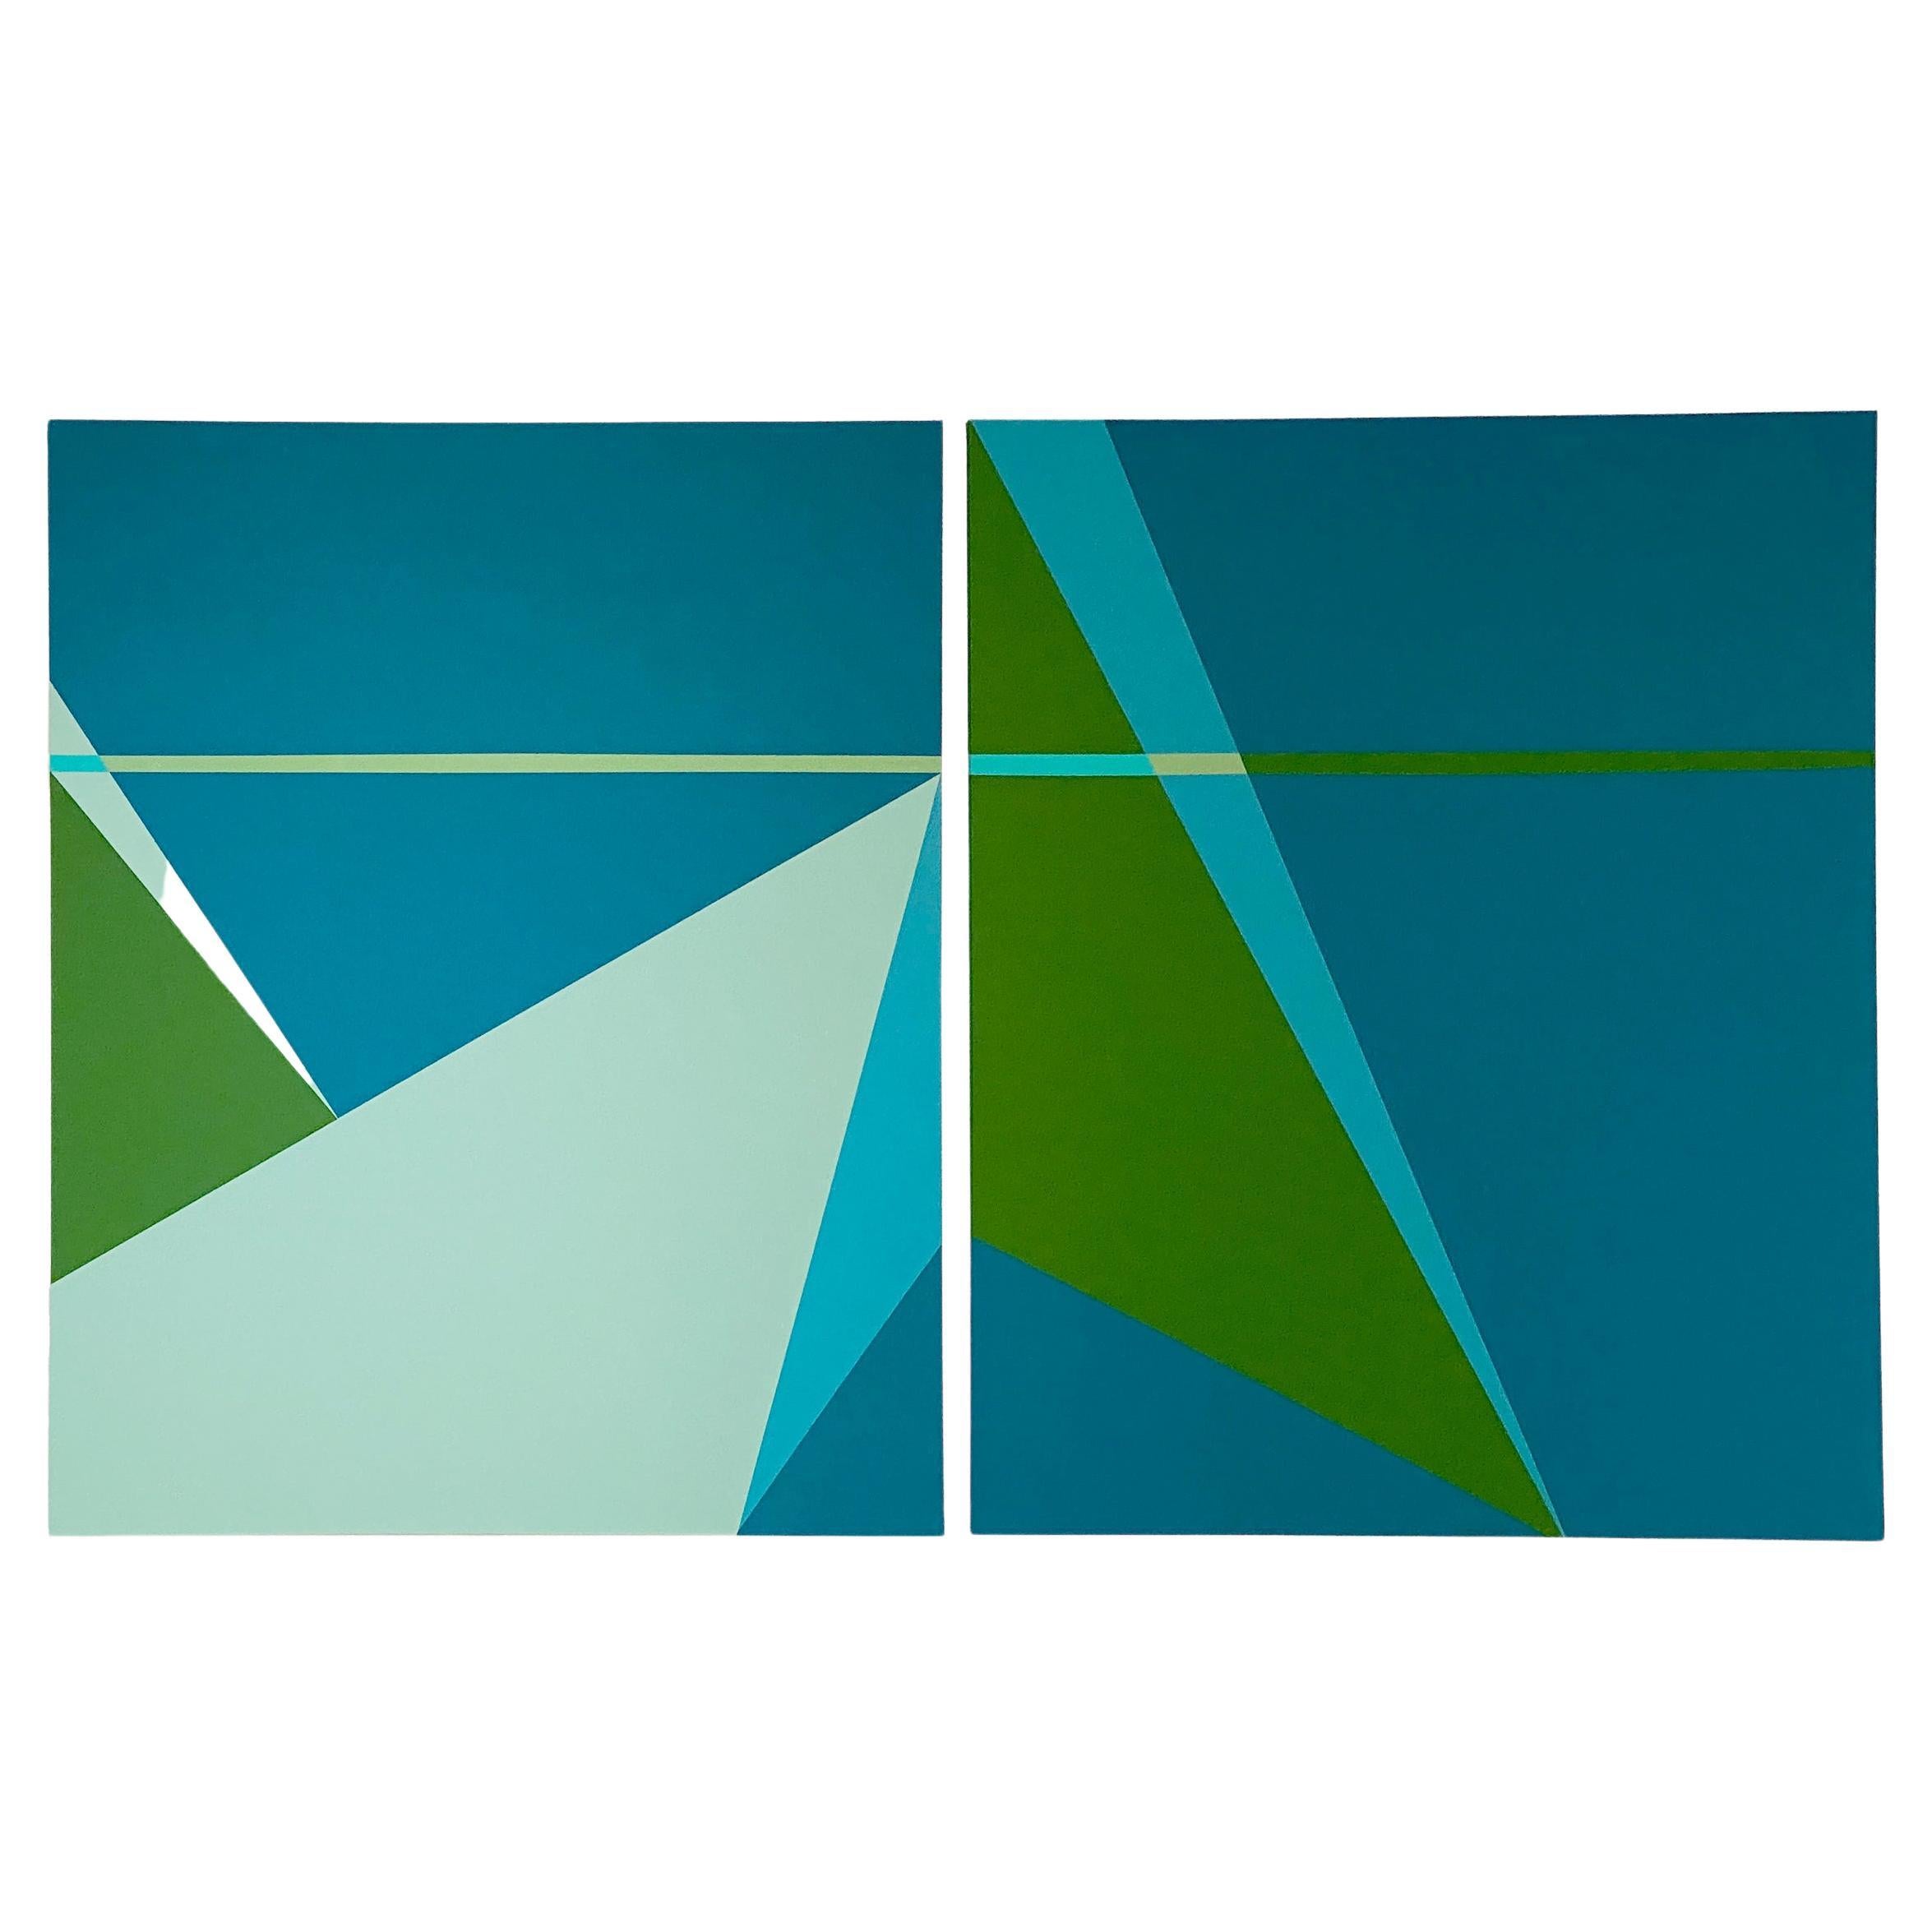 Andrew Mandolene, Teal Time, Diptych, Hard Edge Abstract Modern Painting, 2020